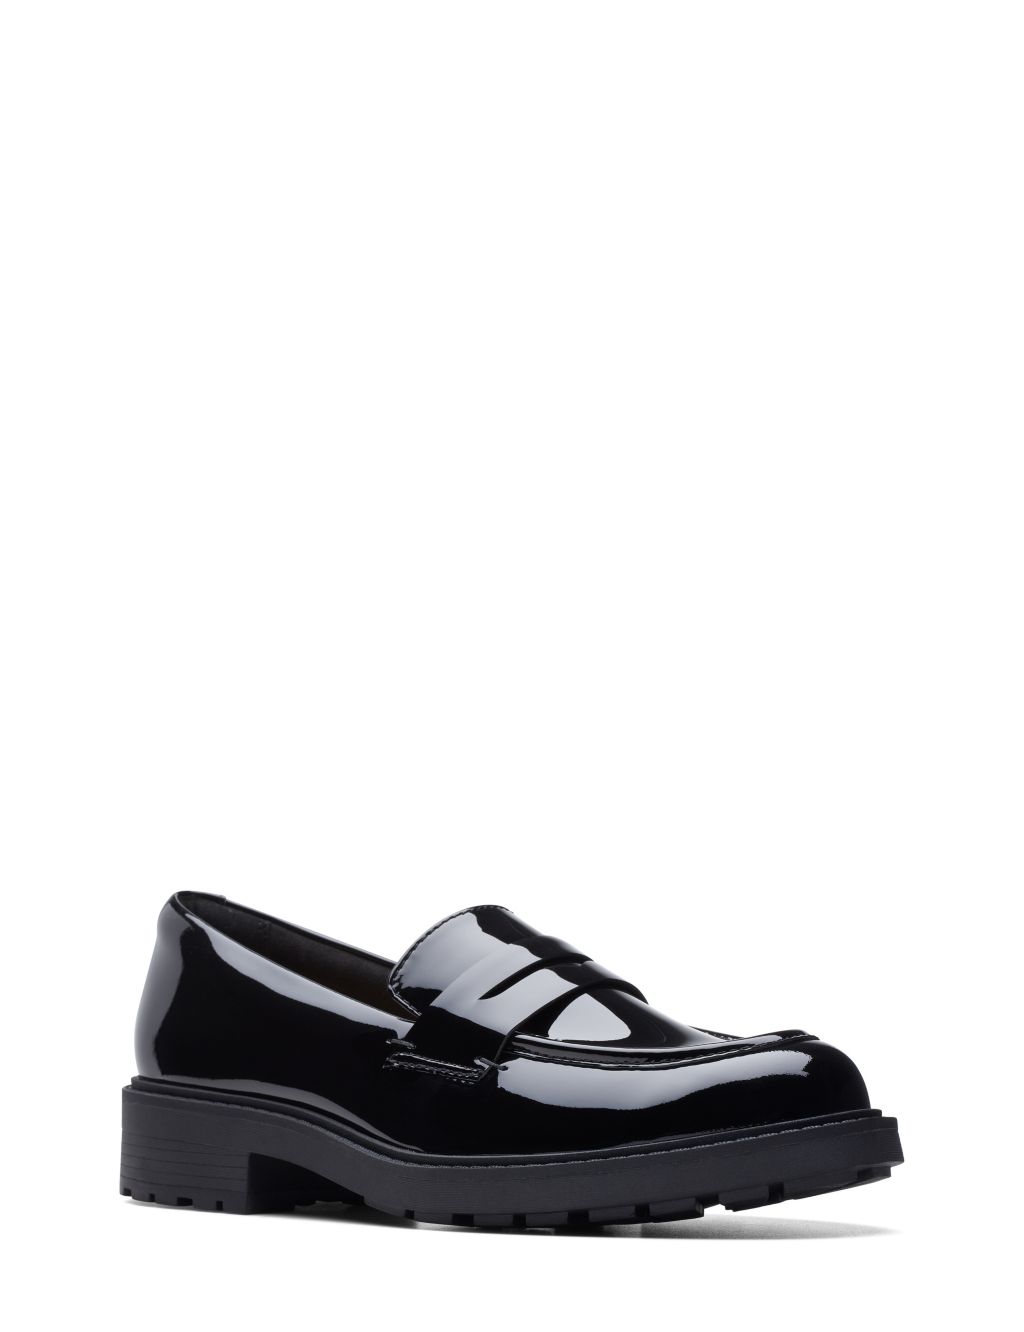 Leather Chunky Block Heel Loafers image 2